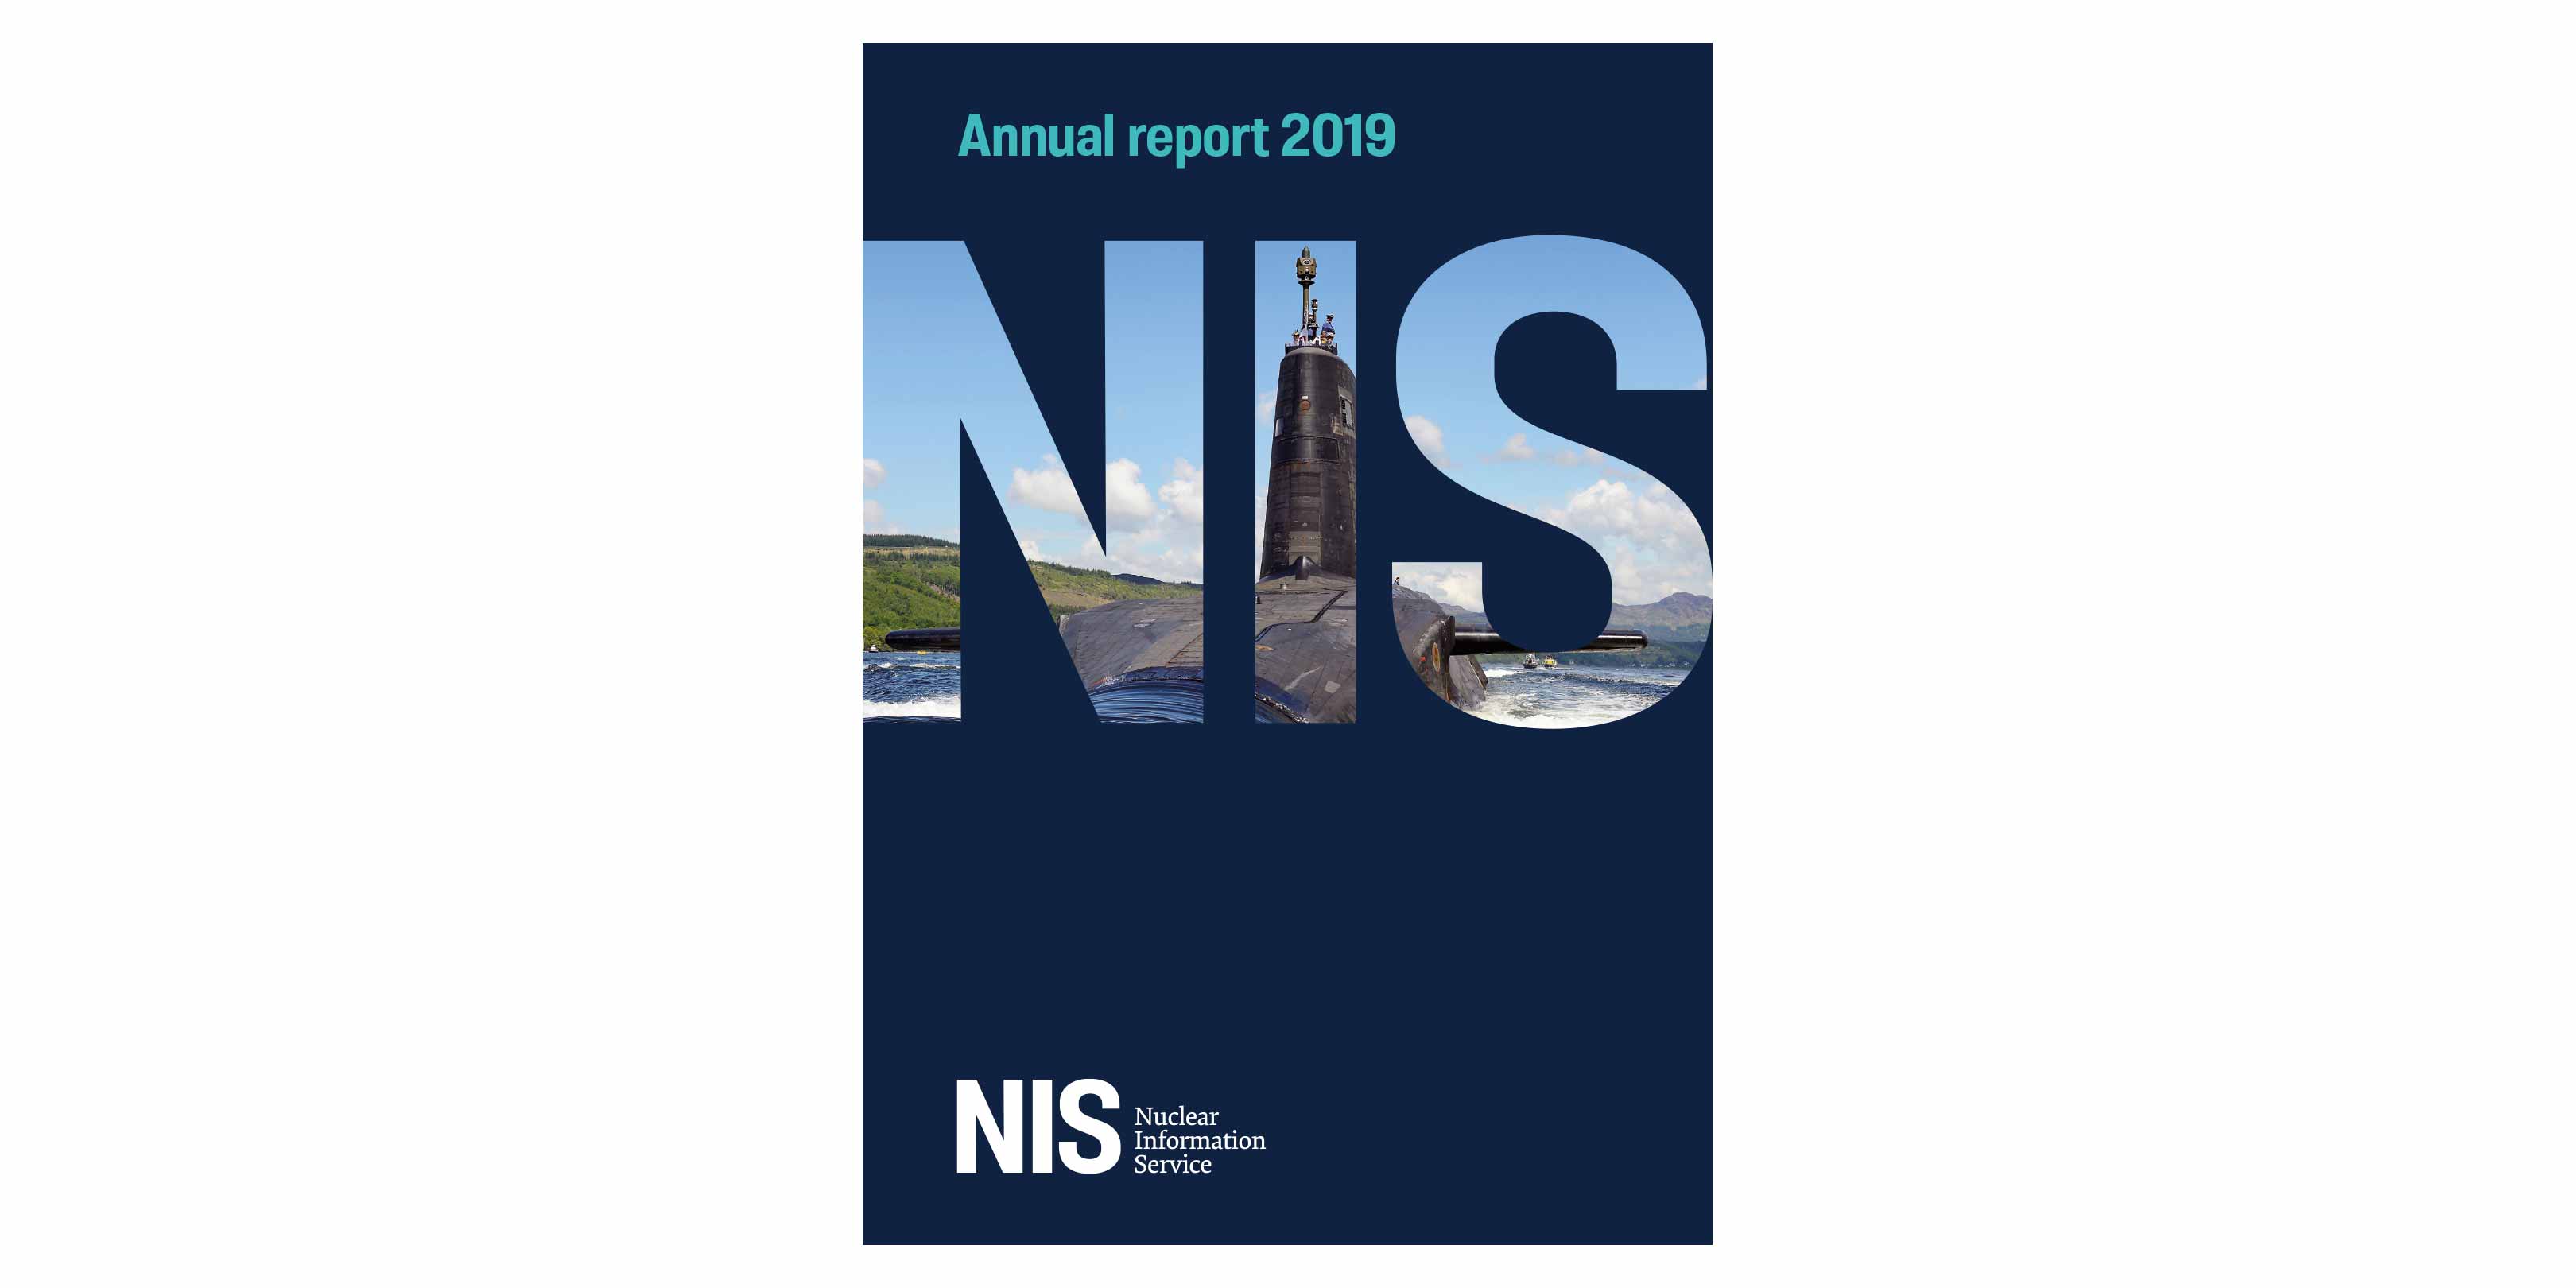 Nuclear Information Service annual report 2019